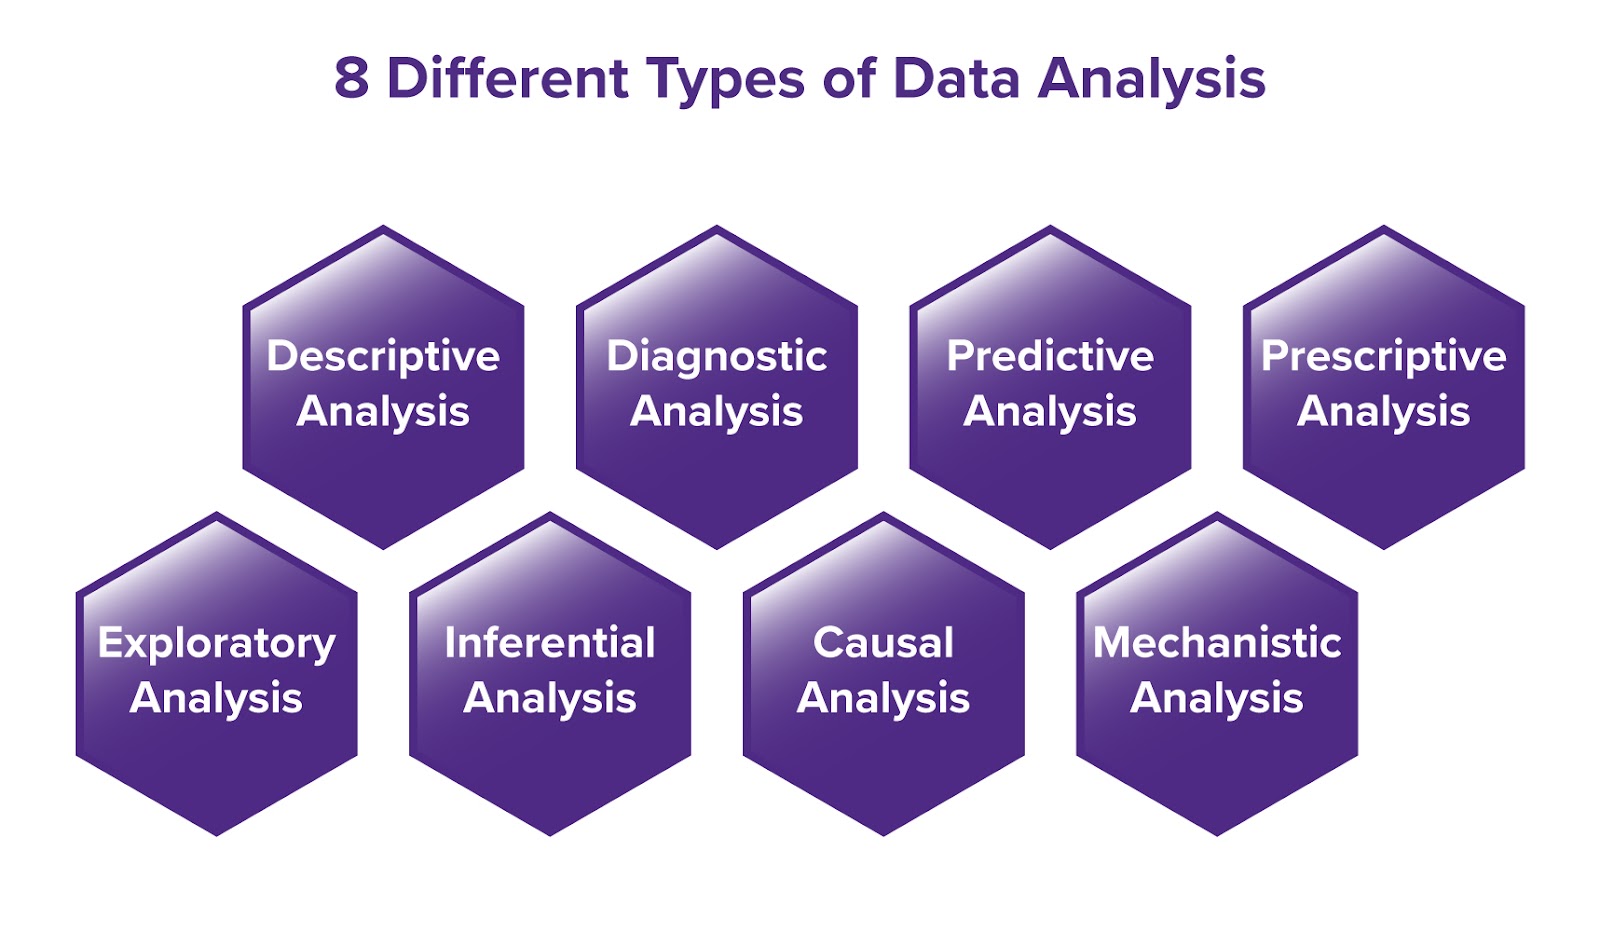 An image that shows different types of data analysis.